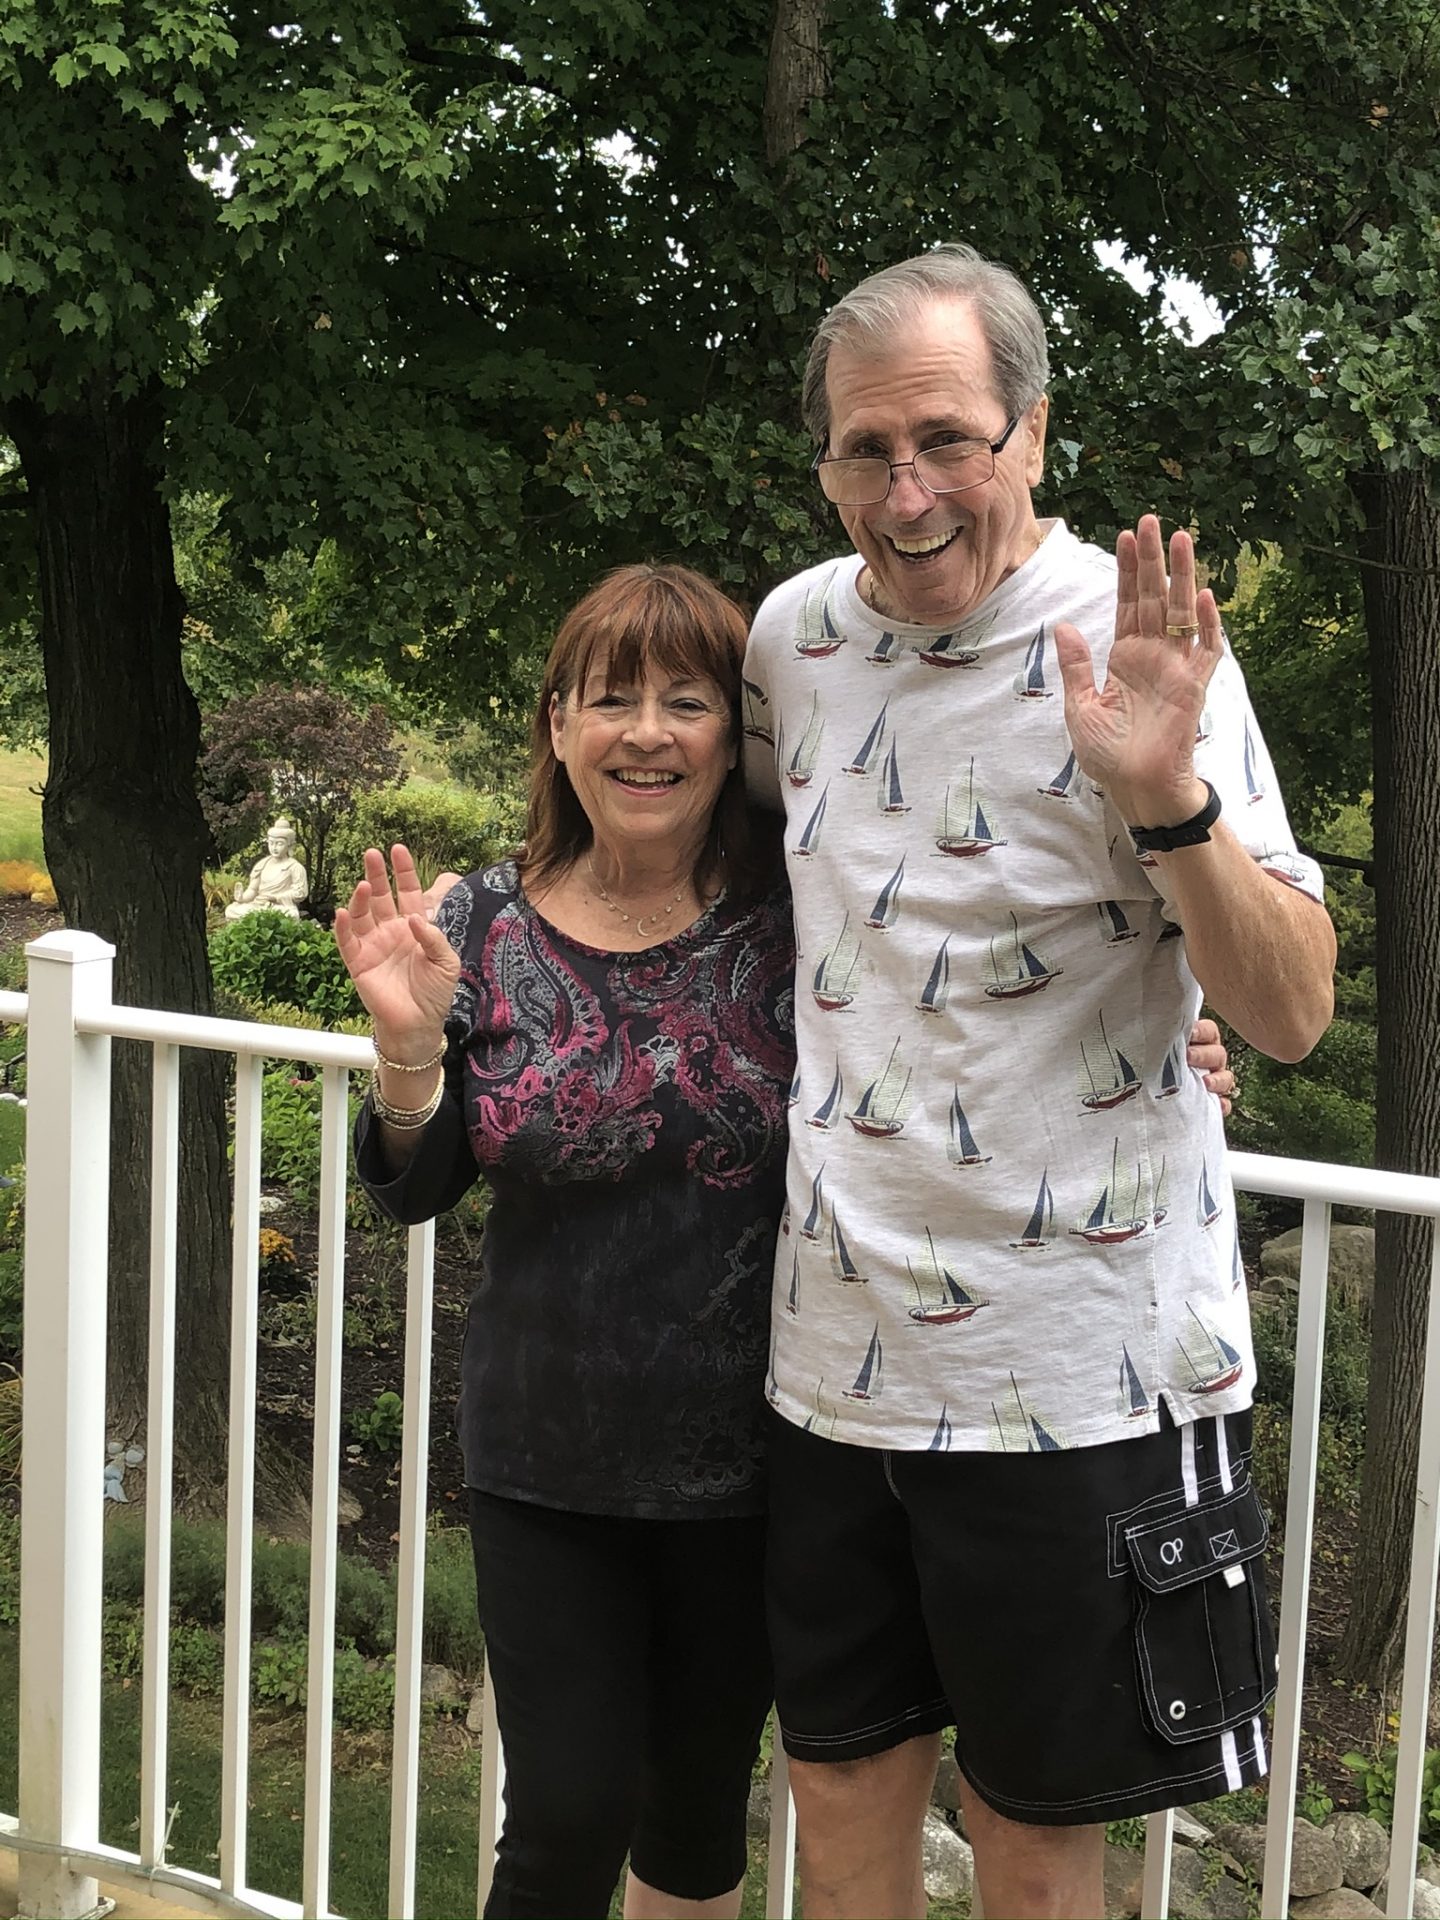 The last picture taken of John and Debbi on their deck in Crystal Springs before their adventure to Florida<br />
I’m so sorry John that I was not able to make it down to visit you and Debbi enjoying your new habitat, I missed you guys the moment you left, and now, sad to know I always will<br />
❤️U!